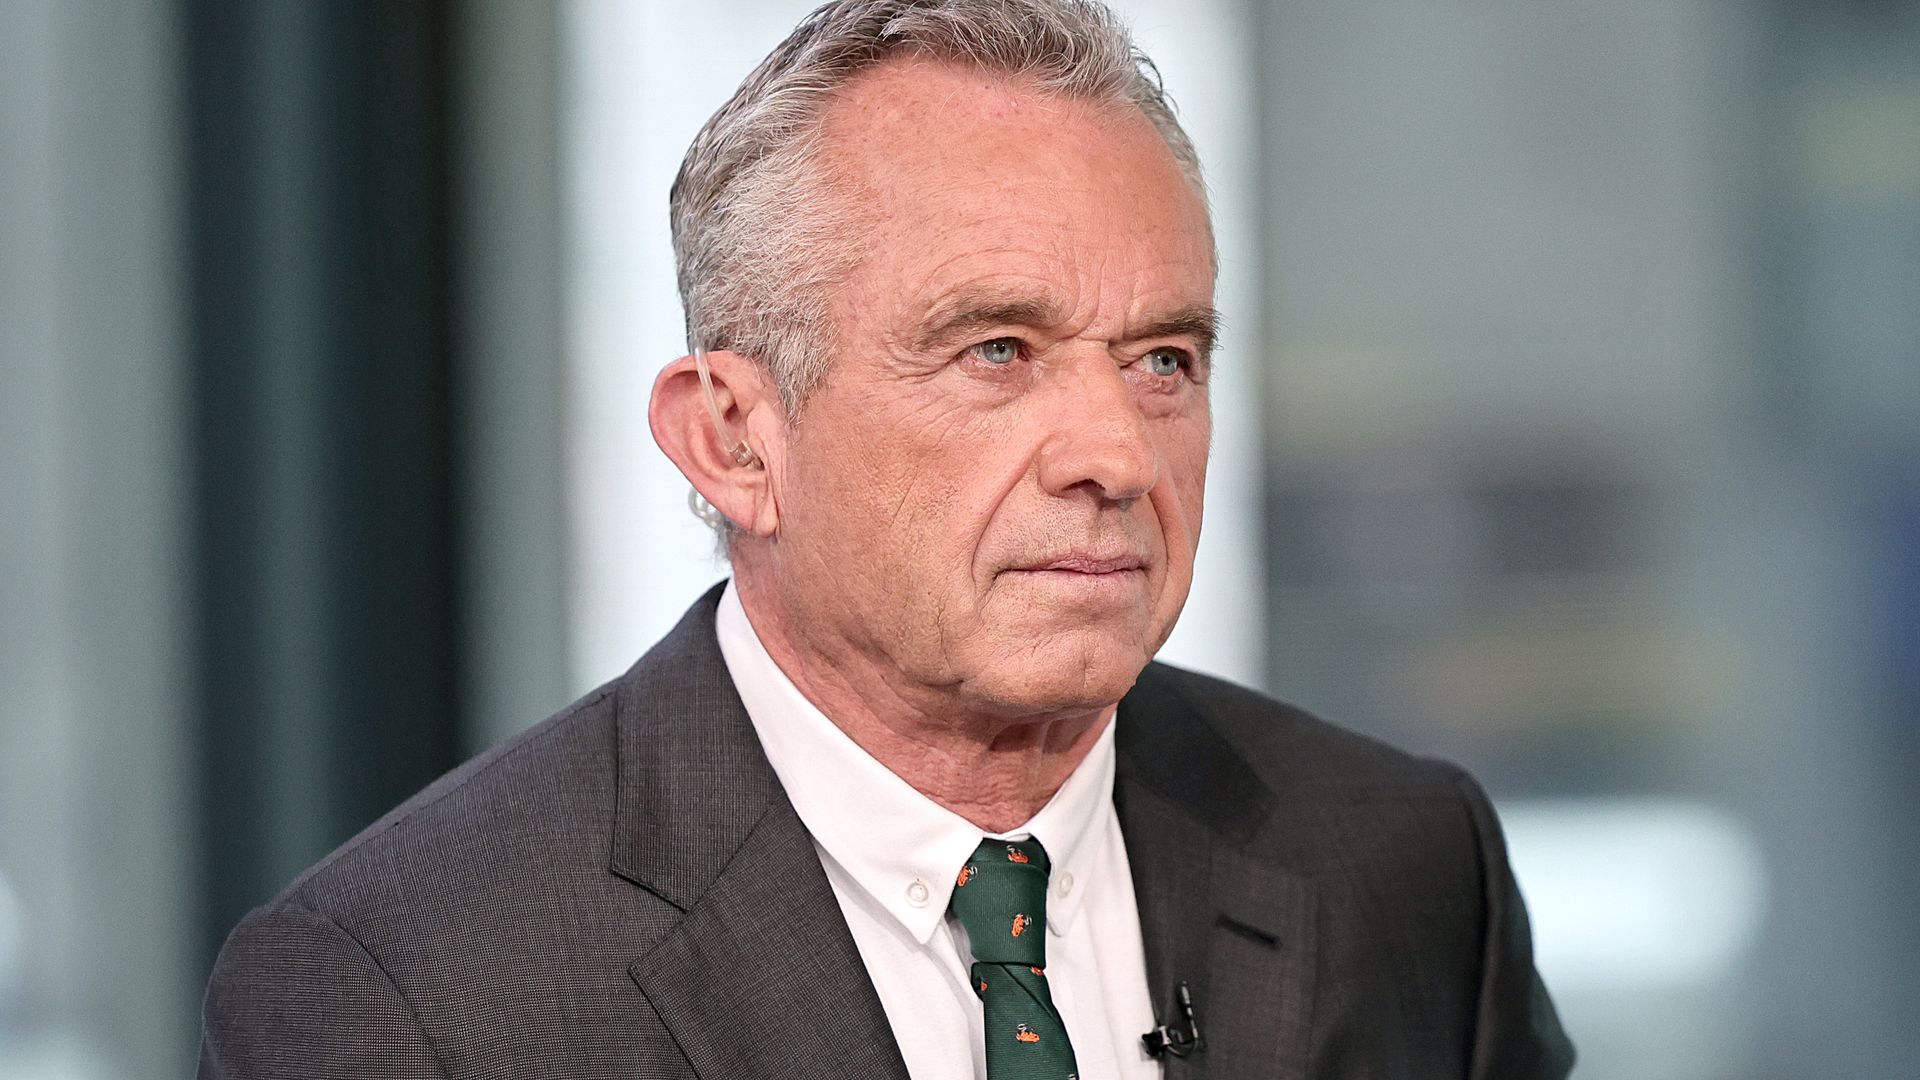 Independent presidential candidate Robert F. Kennedy Jr. didn't participate in the debate with President Biden and former President Trump.